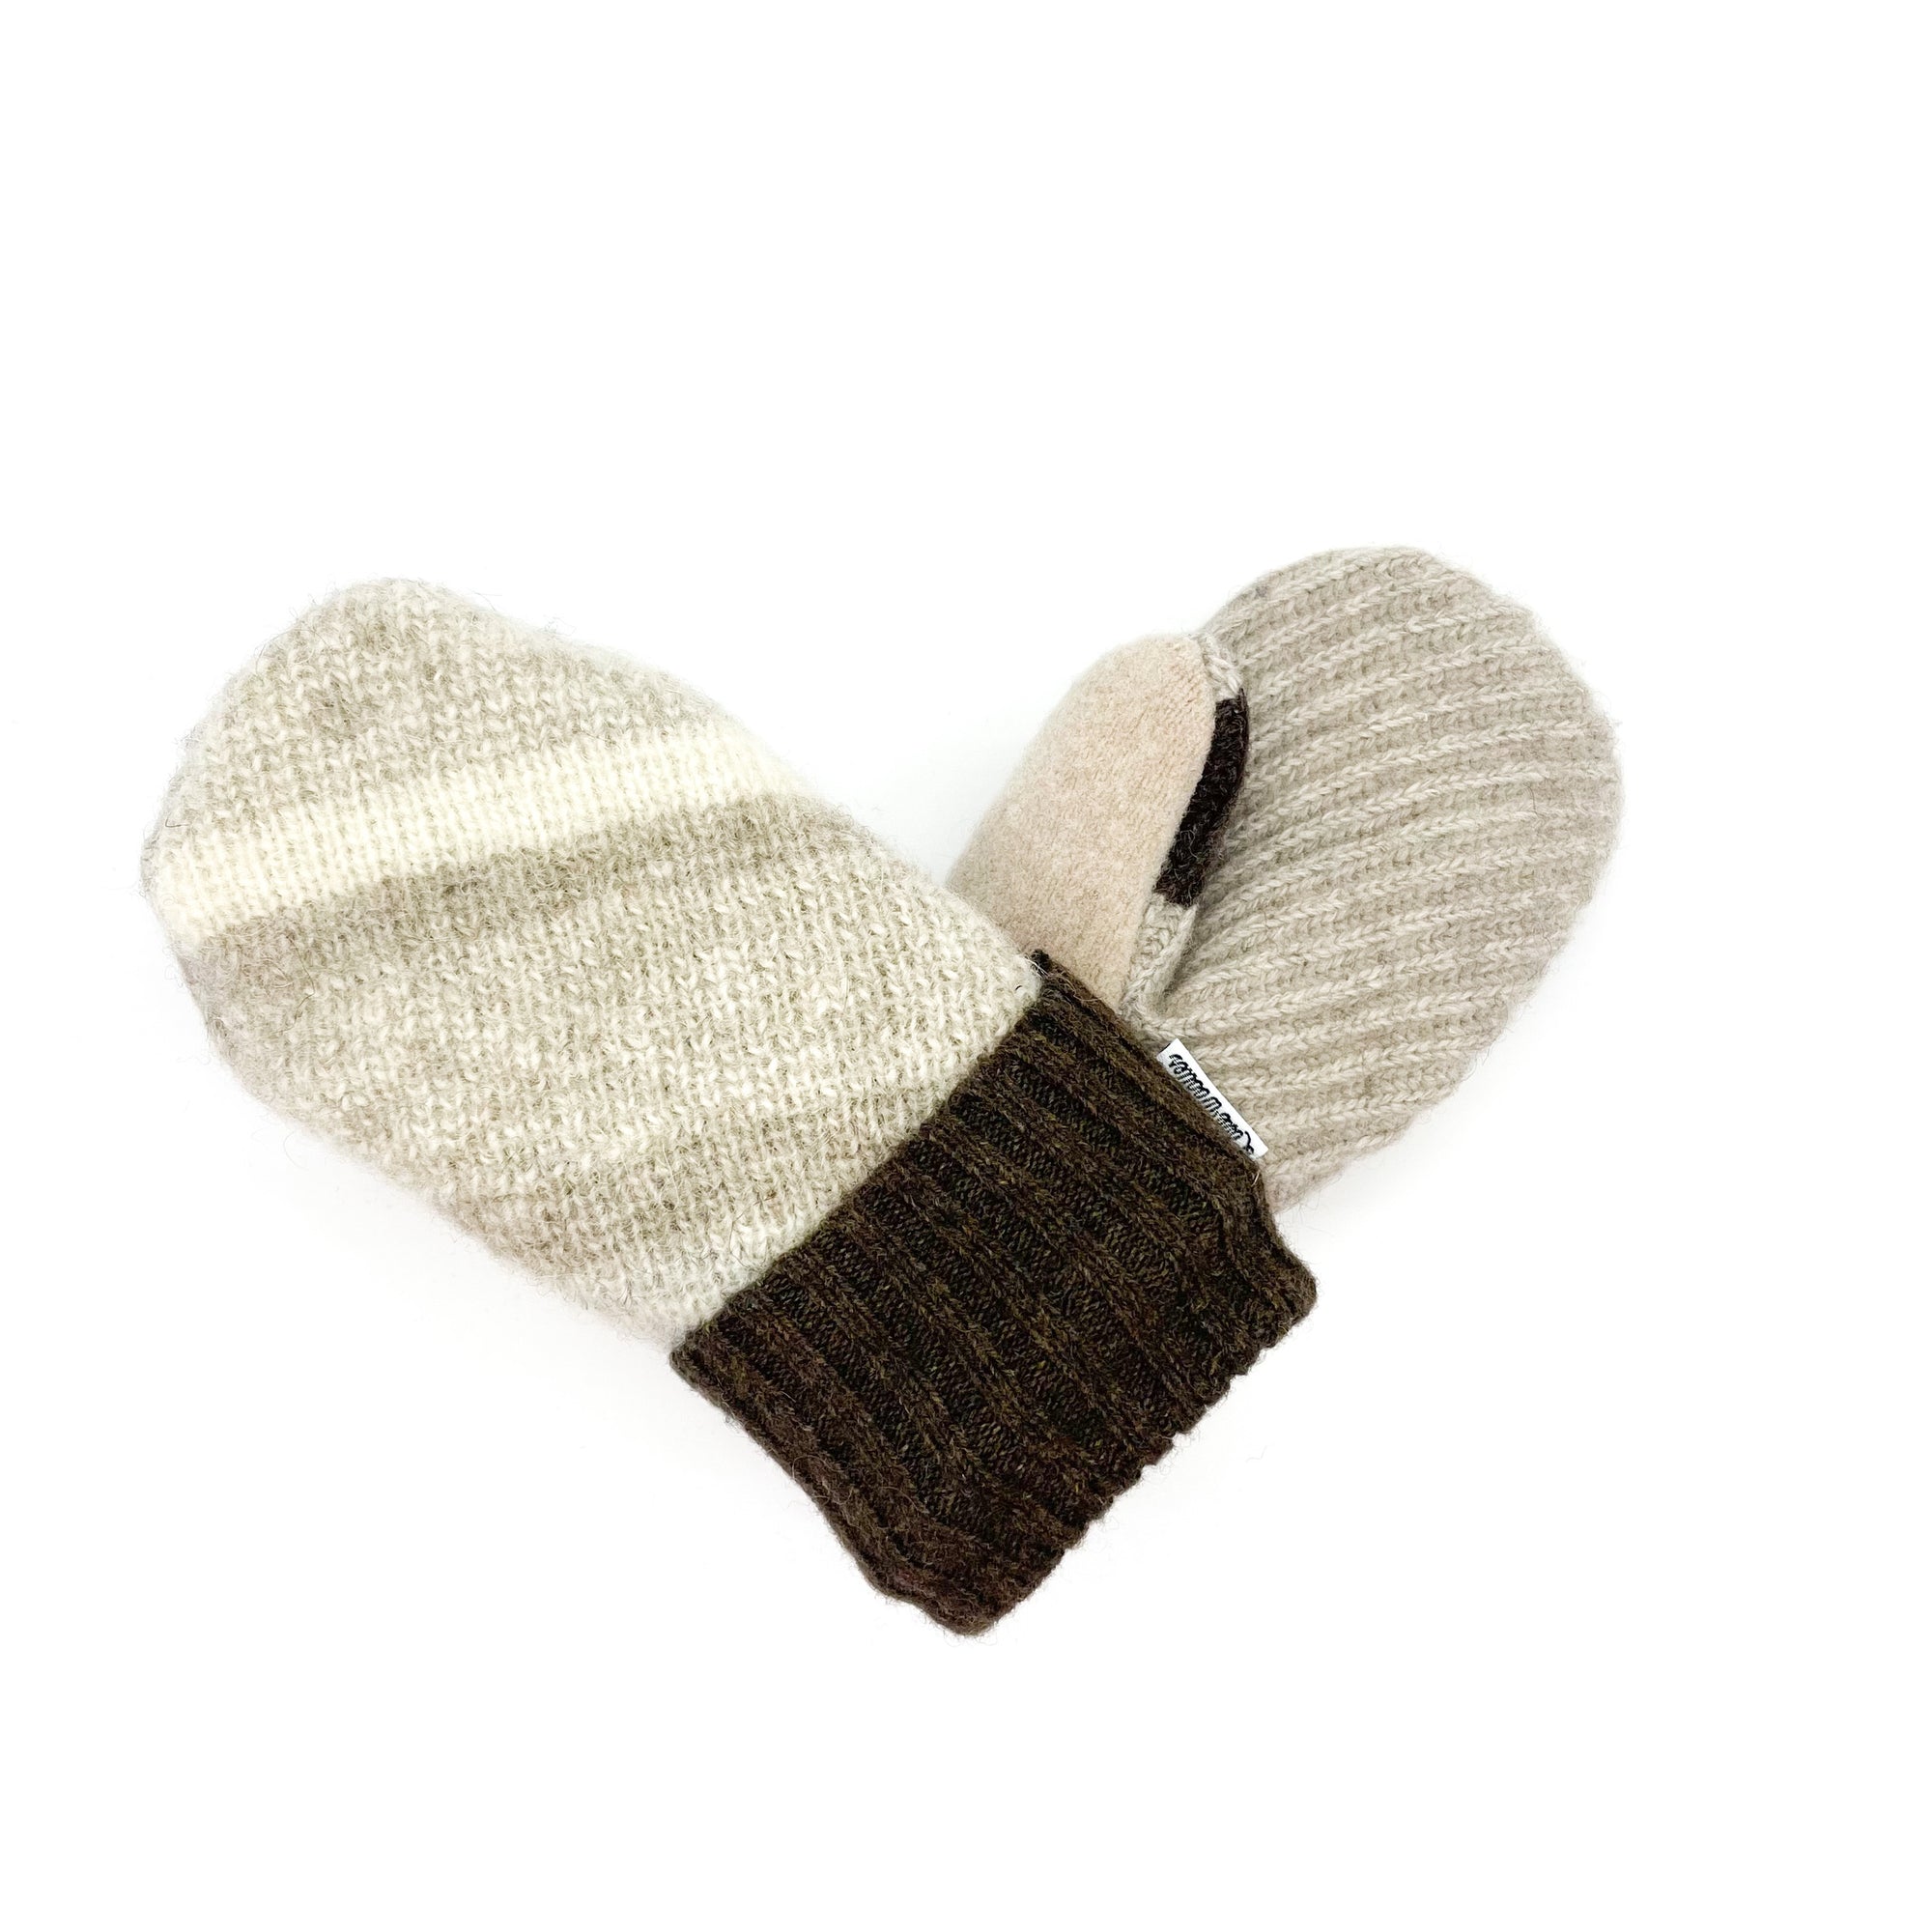 Large Kid's Wool Sweater Mittens | Little Babe